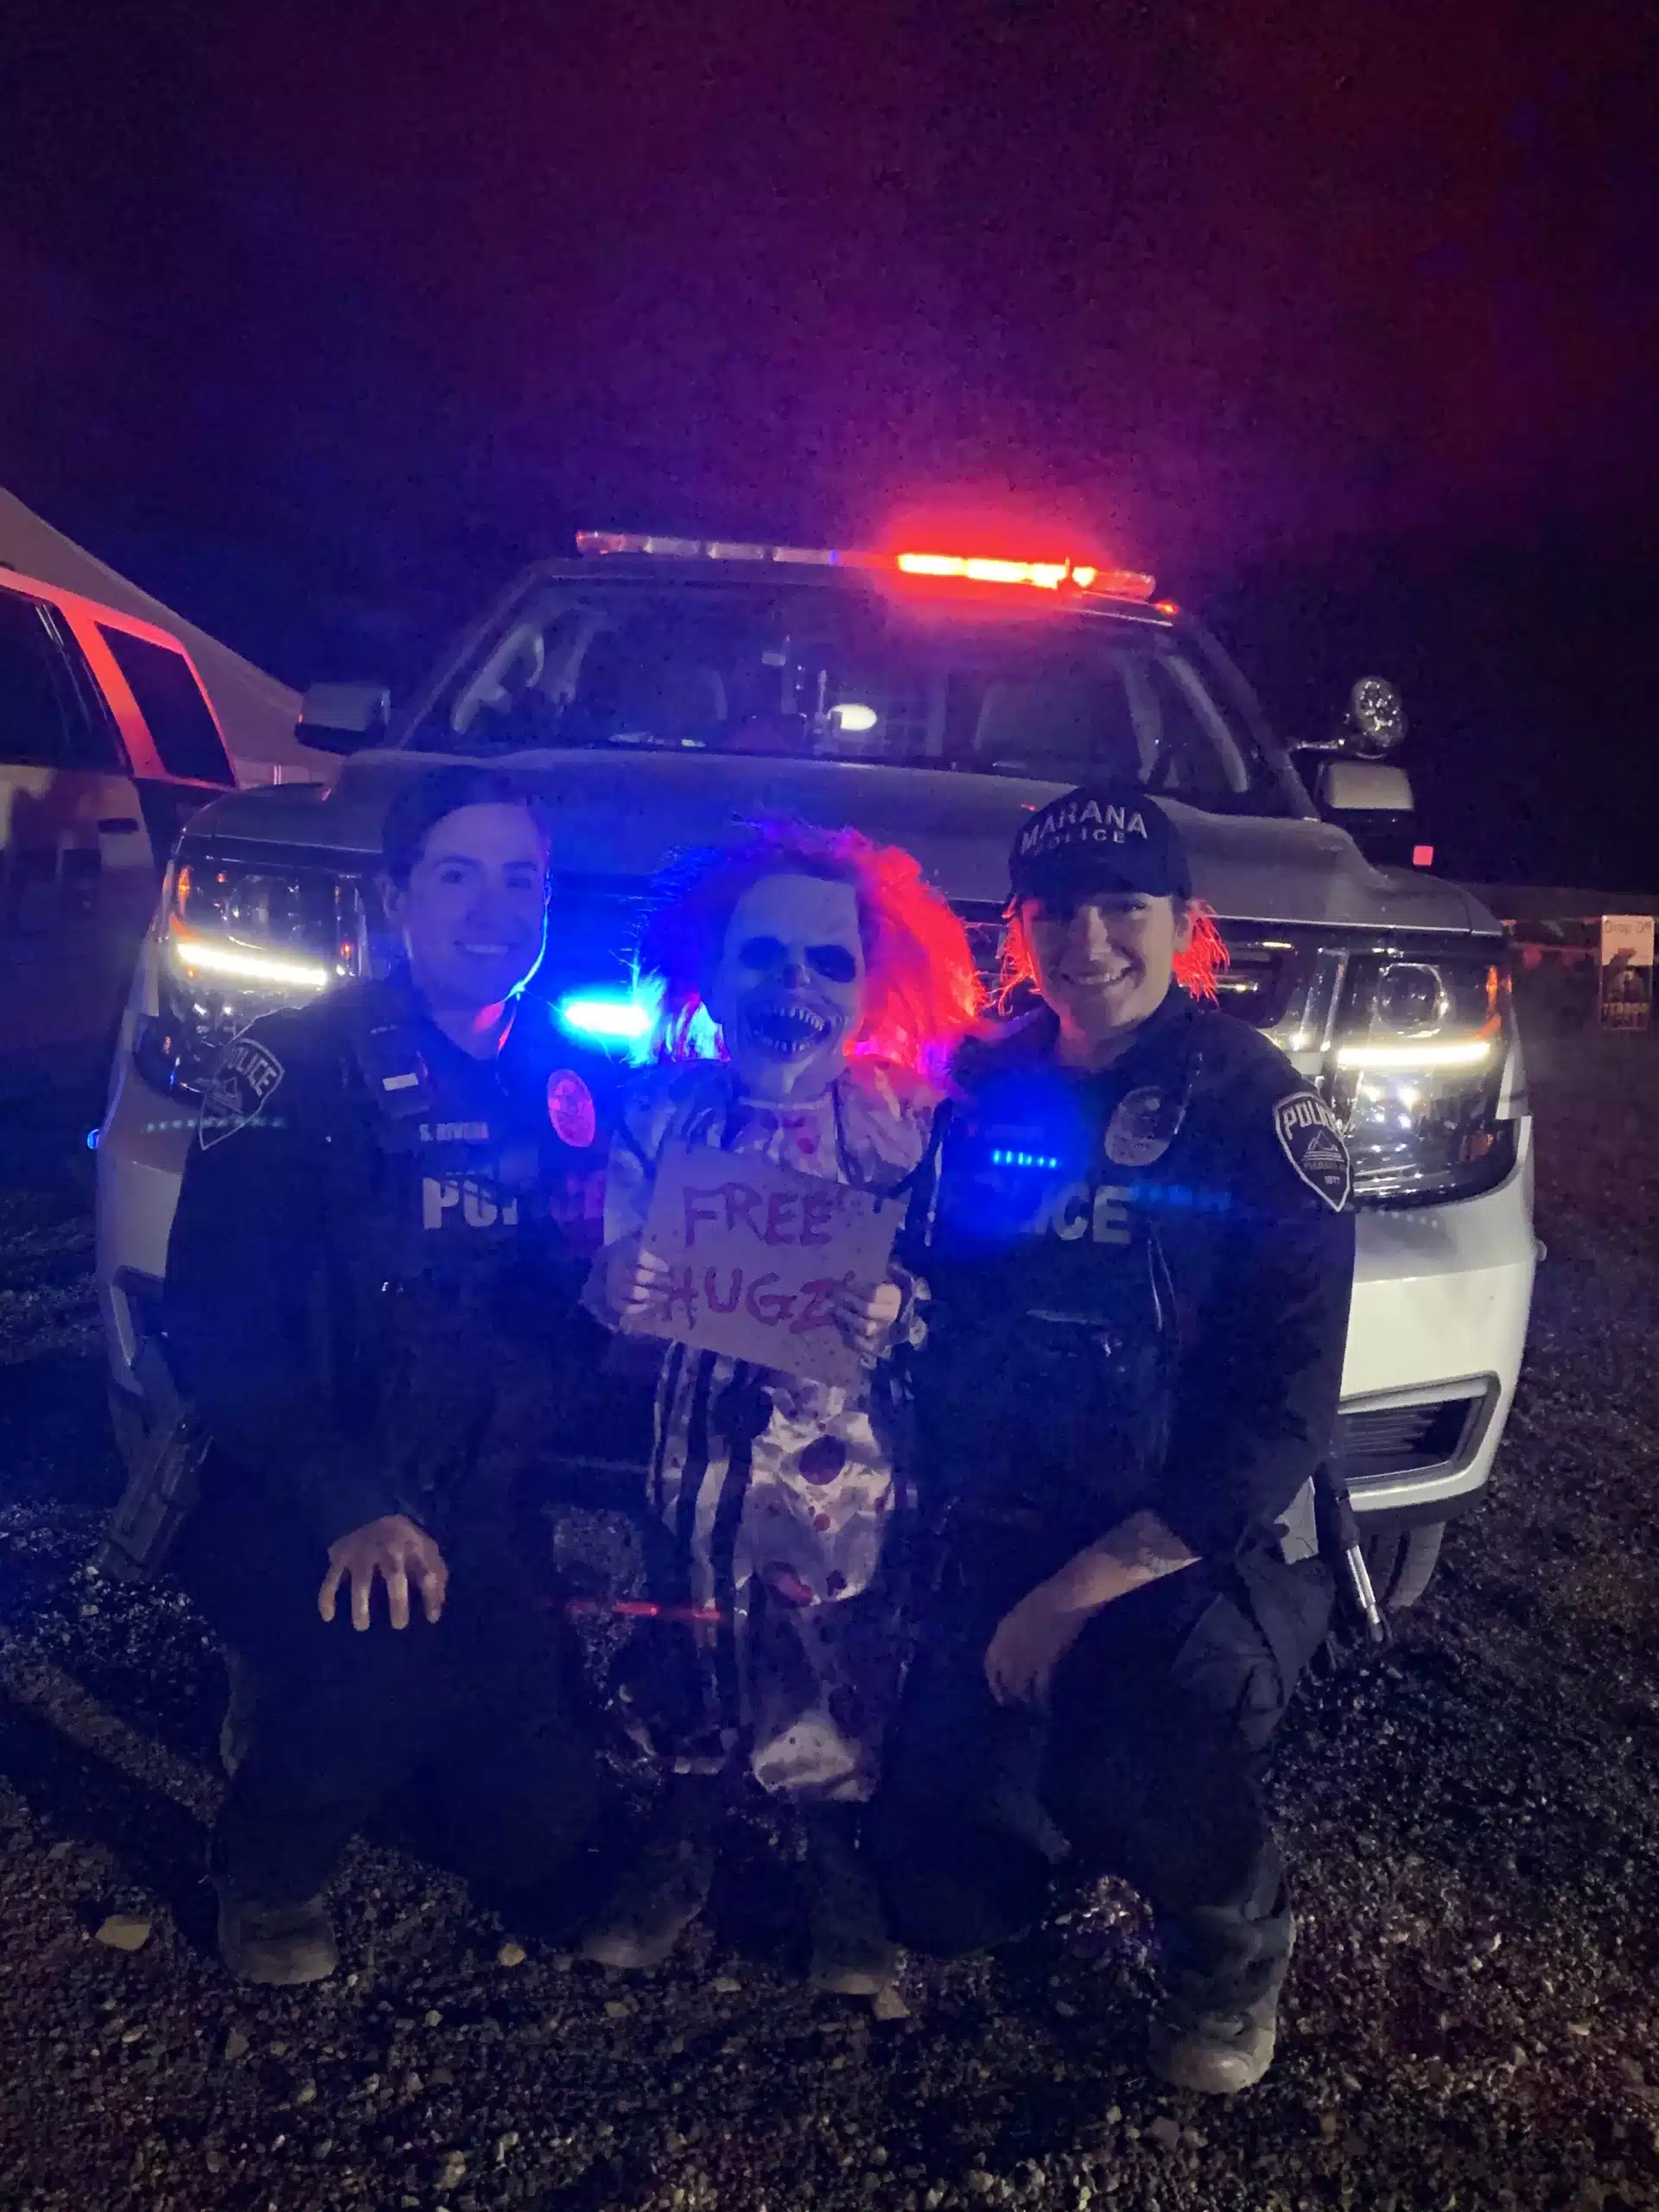 Marana Police Officers Smiling for a Picture Next to a Scary Clown with 